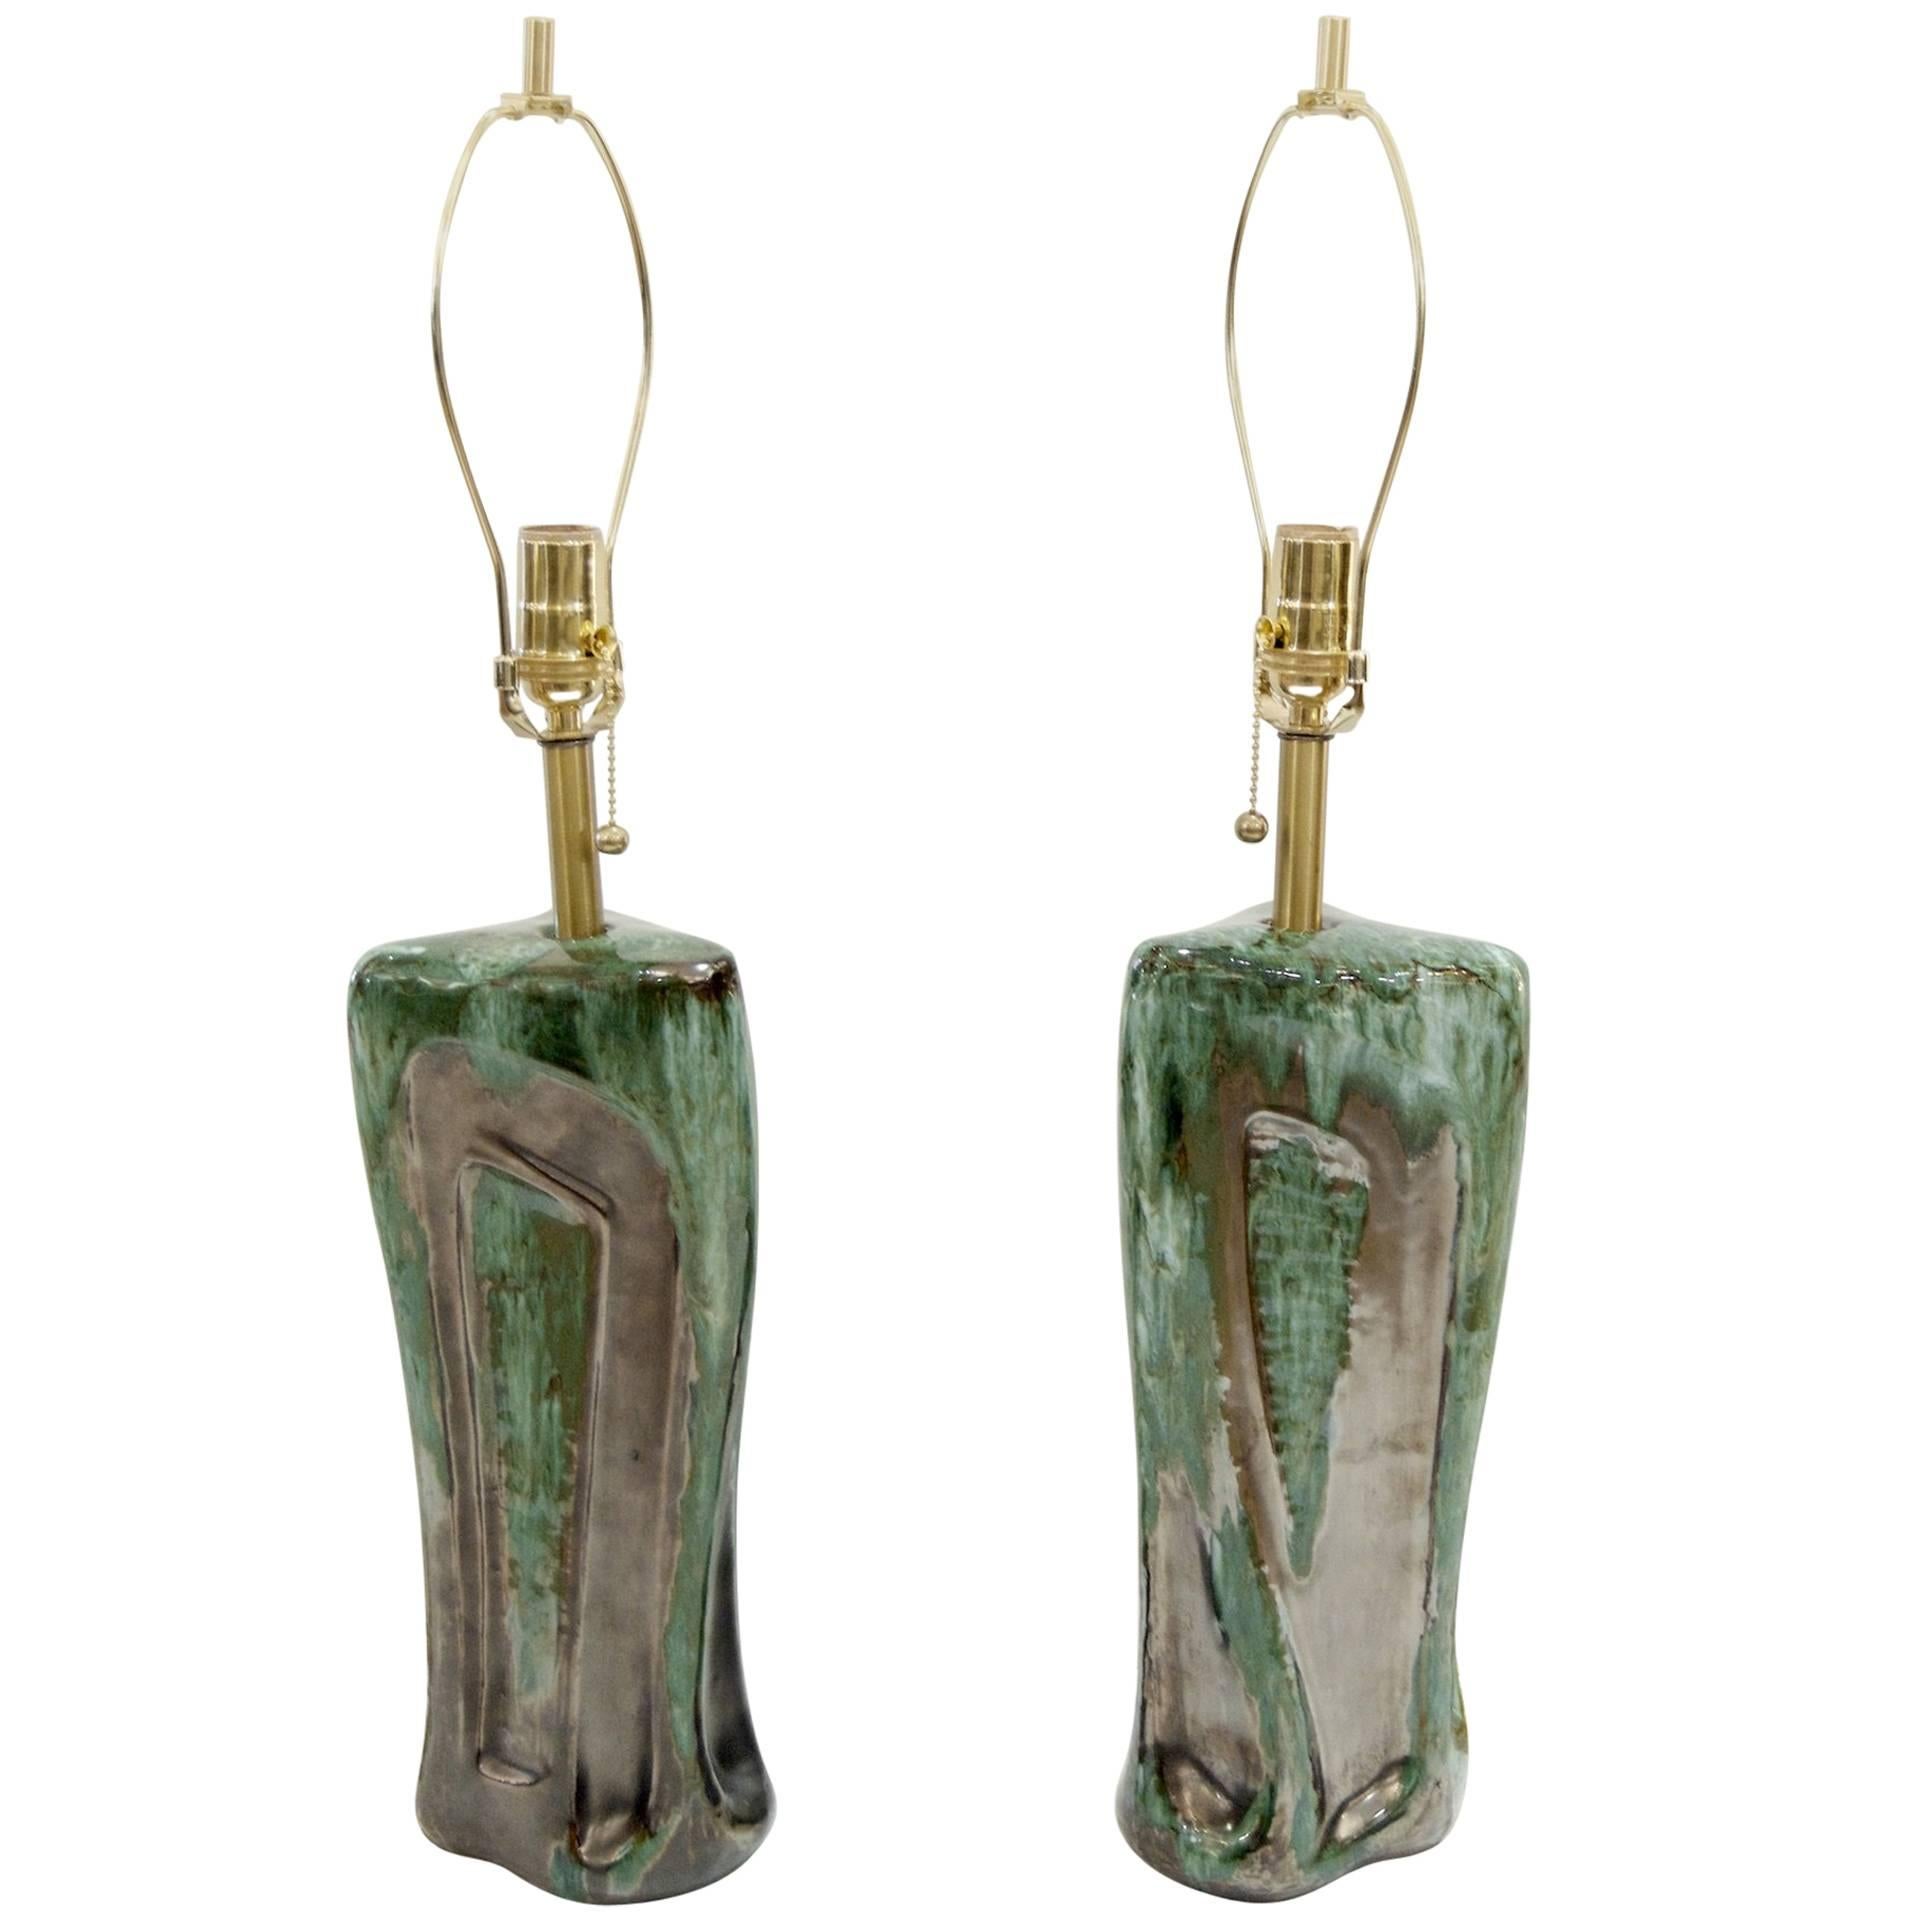 Pair of Green and Graphite Glazed Table Lamps by Kroywen Ceramics